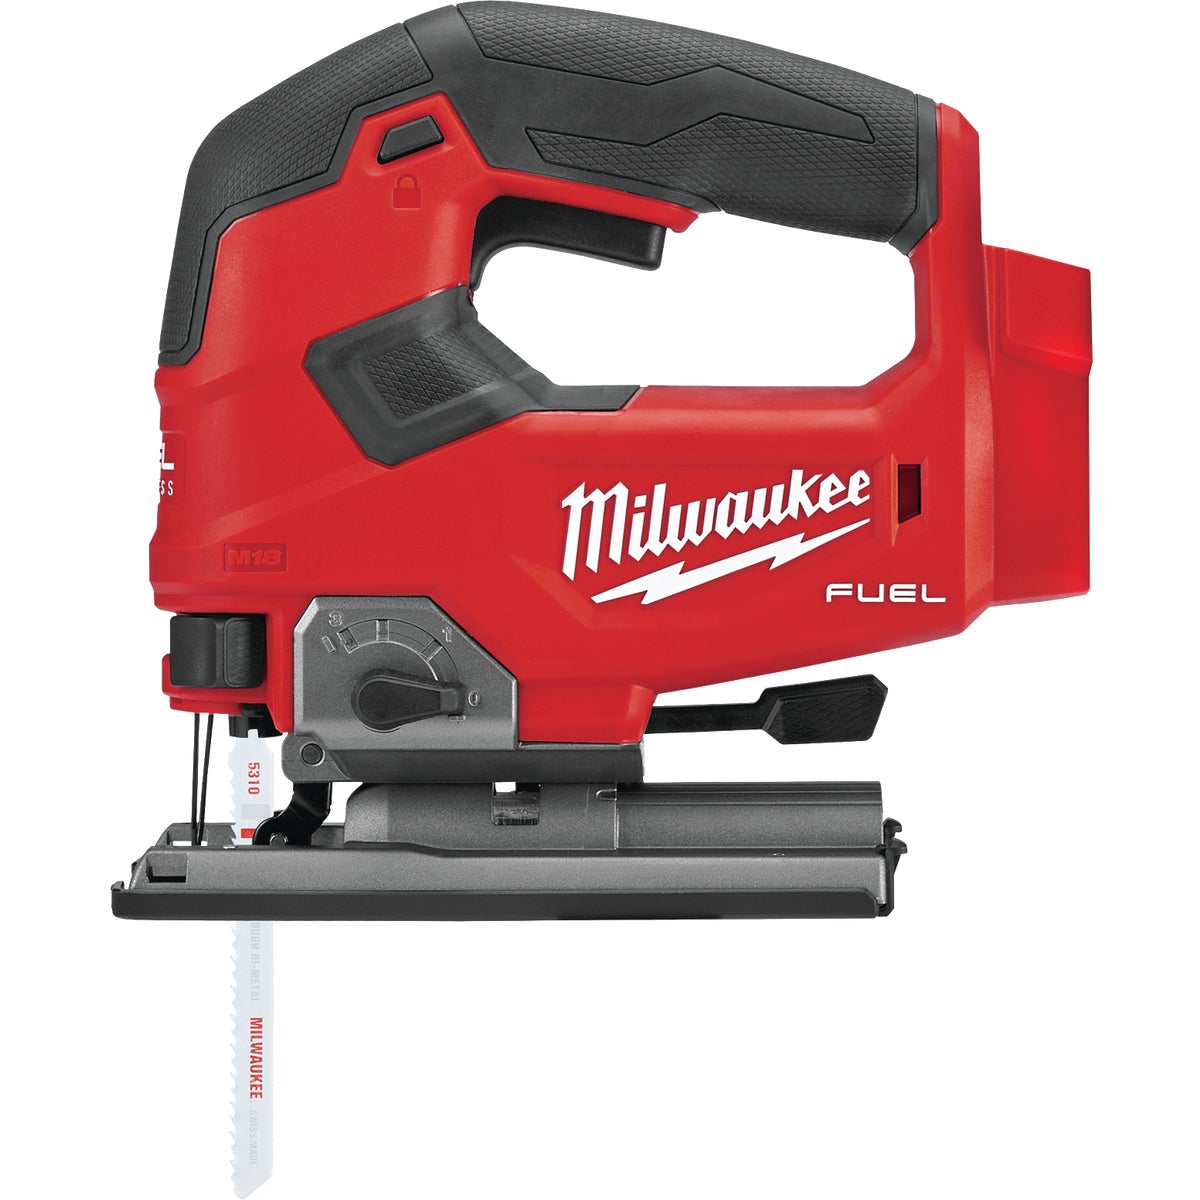 Milwaukee M18 FUEL 18 Volt Lithium-Ion Brushless Cordless Jig Saw (Tool Only)